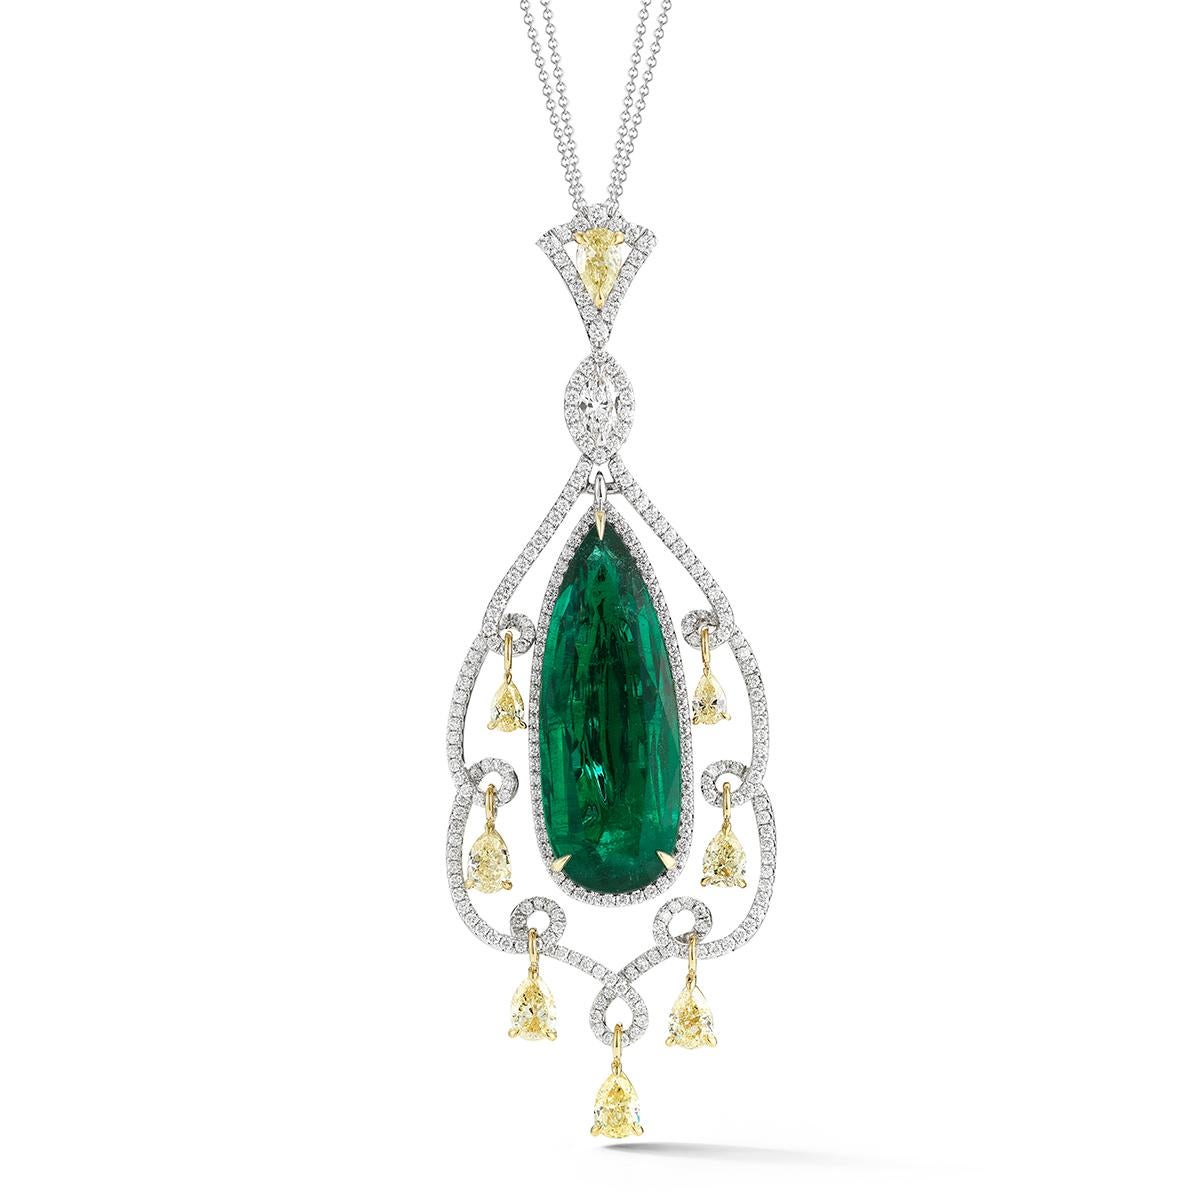 THE EMERALD DECADENCE PENDANT
The rich green of this Emerald is enhanced by the elegant movement of yellow diamonds.
Item:	# 02382
Metal:	18k W / Y
Lab:	Gia
Color Weight:	25.41 ct.
Diamond Weight:	10.25 ct.
